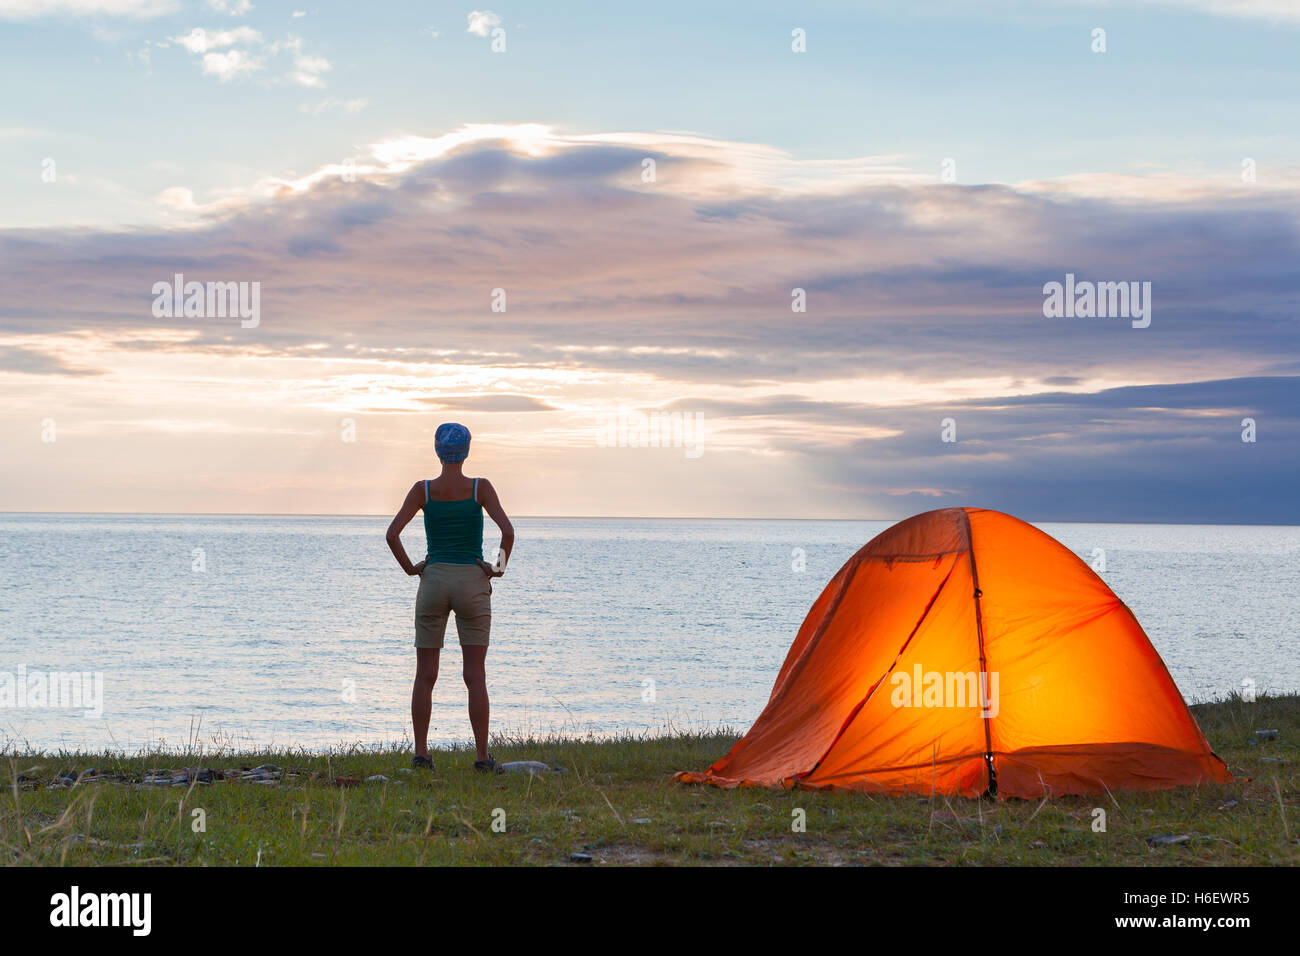 Sunrise in camping day Stock Photo